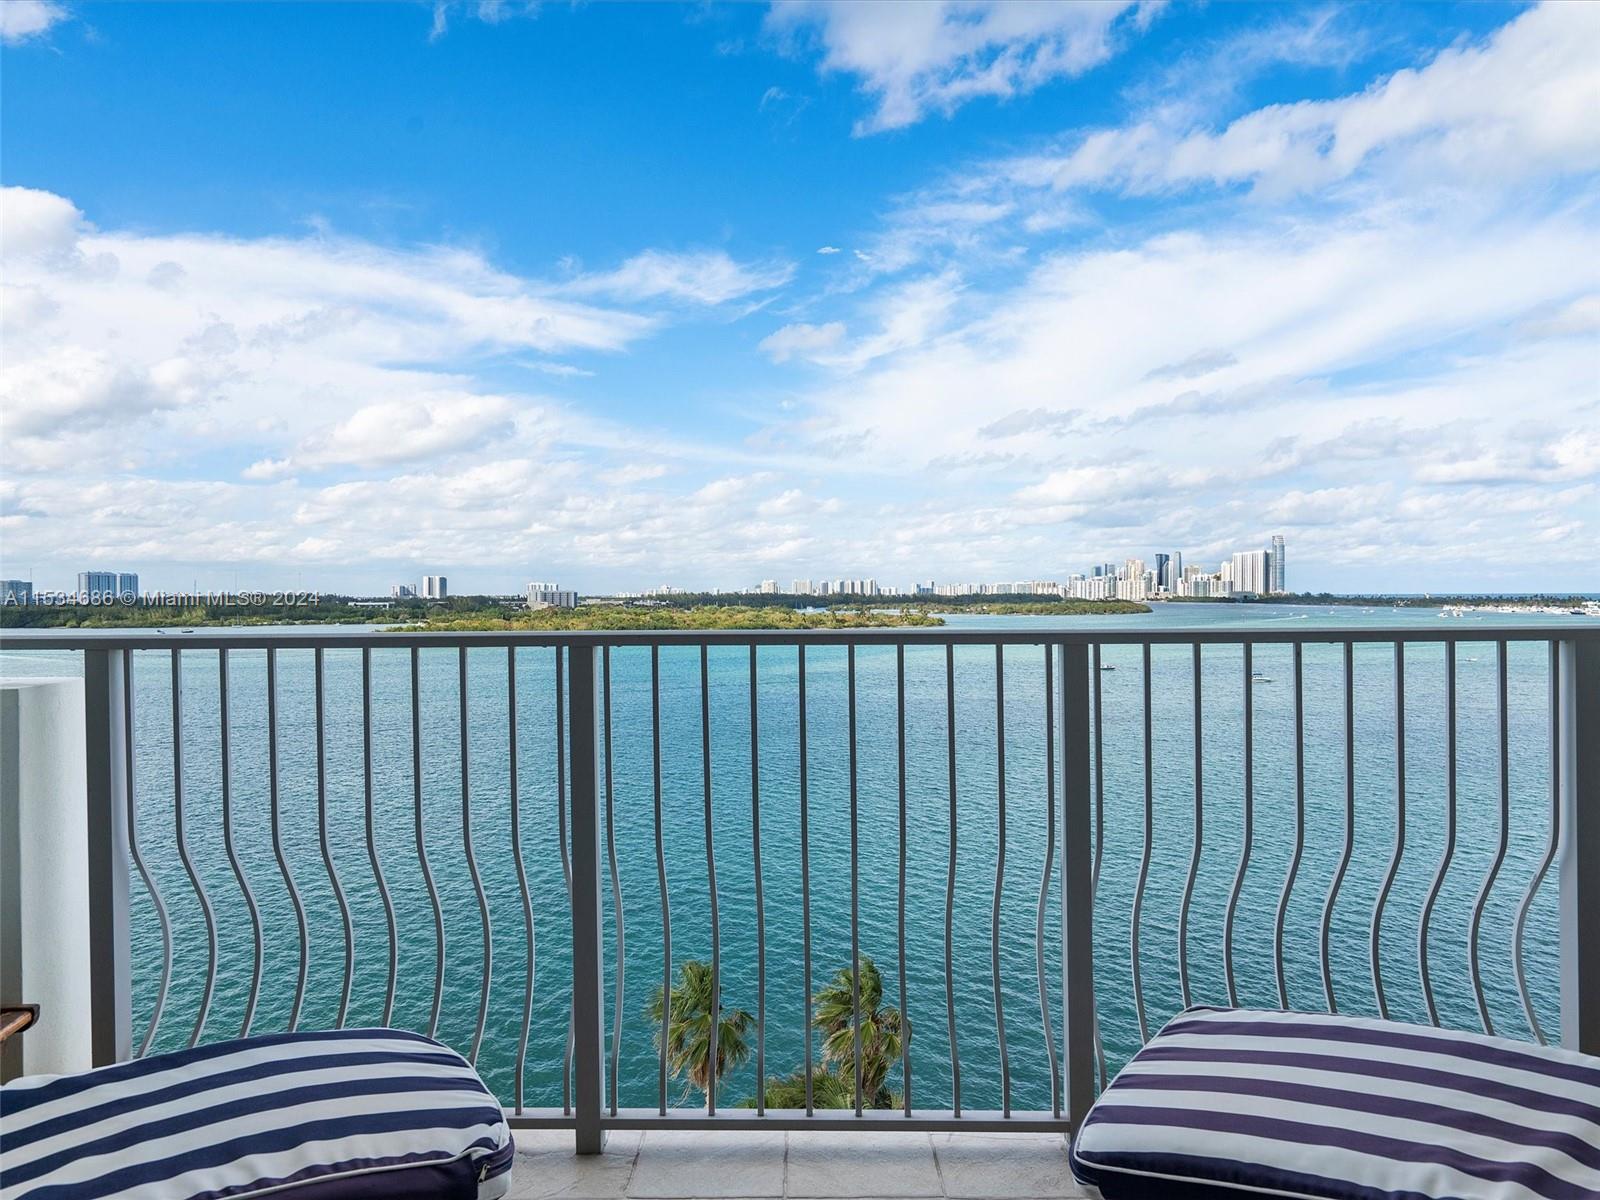 EXTREMELY RARE direct waterfront double corner unit available for sale at Island Pointe Condominium. This Unit offers 4 bedrooms and 3 bathrooms facing north-northwest towards Biscayne Bay. ALL ROOMS FACE DIRECT WATER. Large galley kitchen with lots of cabinet space. Walk-in closets. Spacious living room and dining room. Washer and dryer inside unit. Unit offers two separate waterfront balconies. Building has lots of amenities: Heated pool, large gym, media room, tiki huts & gas grills, 24-hour front desk attendant, and on-site management. Gated property. Premium cable & high-speed internet. Cooling tower & chiller system for air conditioning, electric bills are lower. Walk to A+ school. Unit comes with 3 garage parking spaces, 2 non garage parking spaces, and 3 AC storage units.